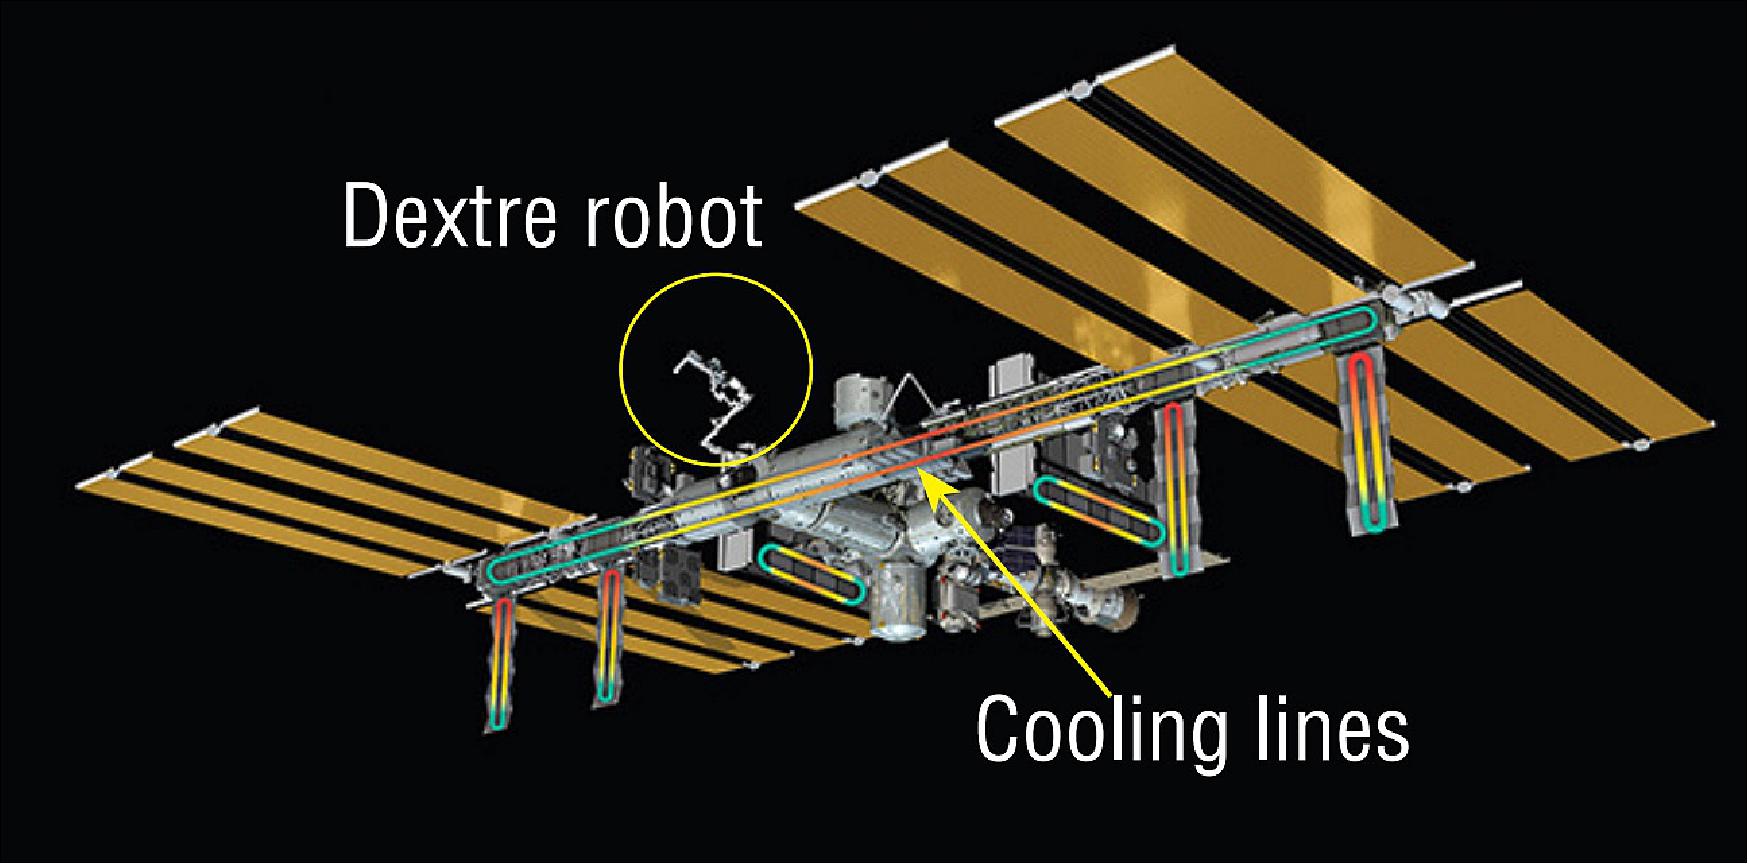 Figure 2: Controlled by a team at NASA/JSC (Johnson Space Center), the Canadian Space Agency’s Dextre robot point IRELL toward the station’s cooling lines. A NASA ground team will monitor the signals from Earth (image credit: NASA/Goddard Spaceflight Center)